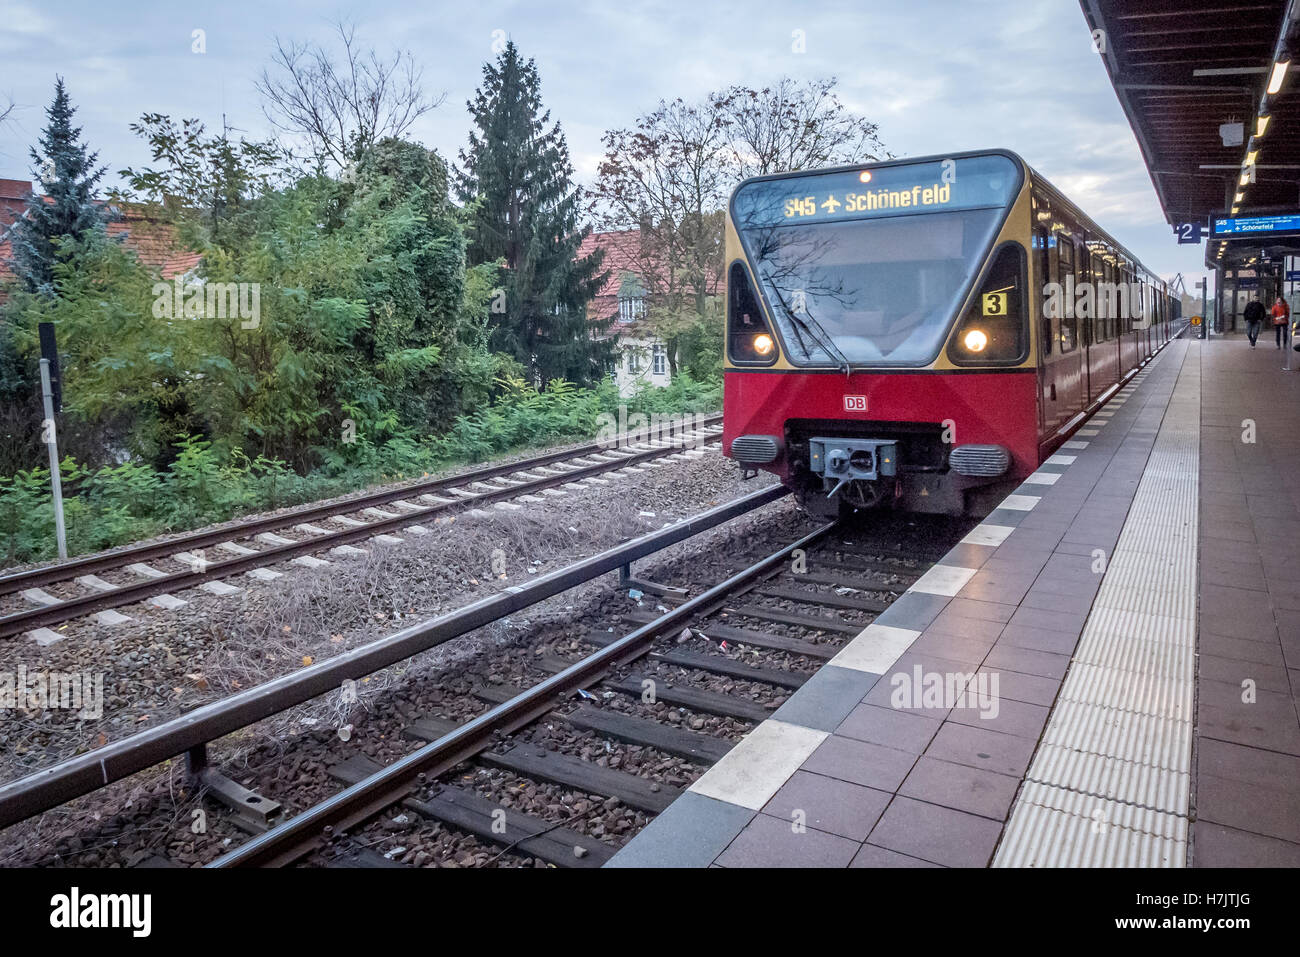 S-Bahn trains at a suburban railway station on the edge of Berlin Stock Photo